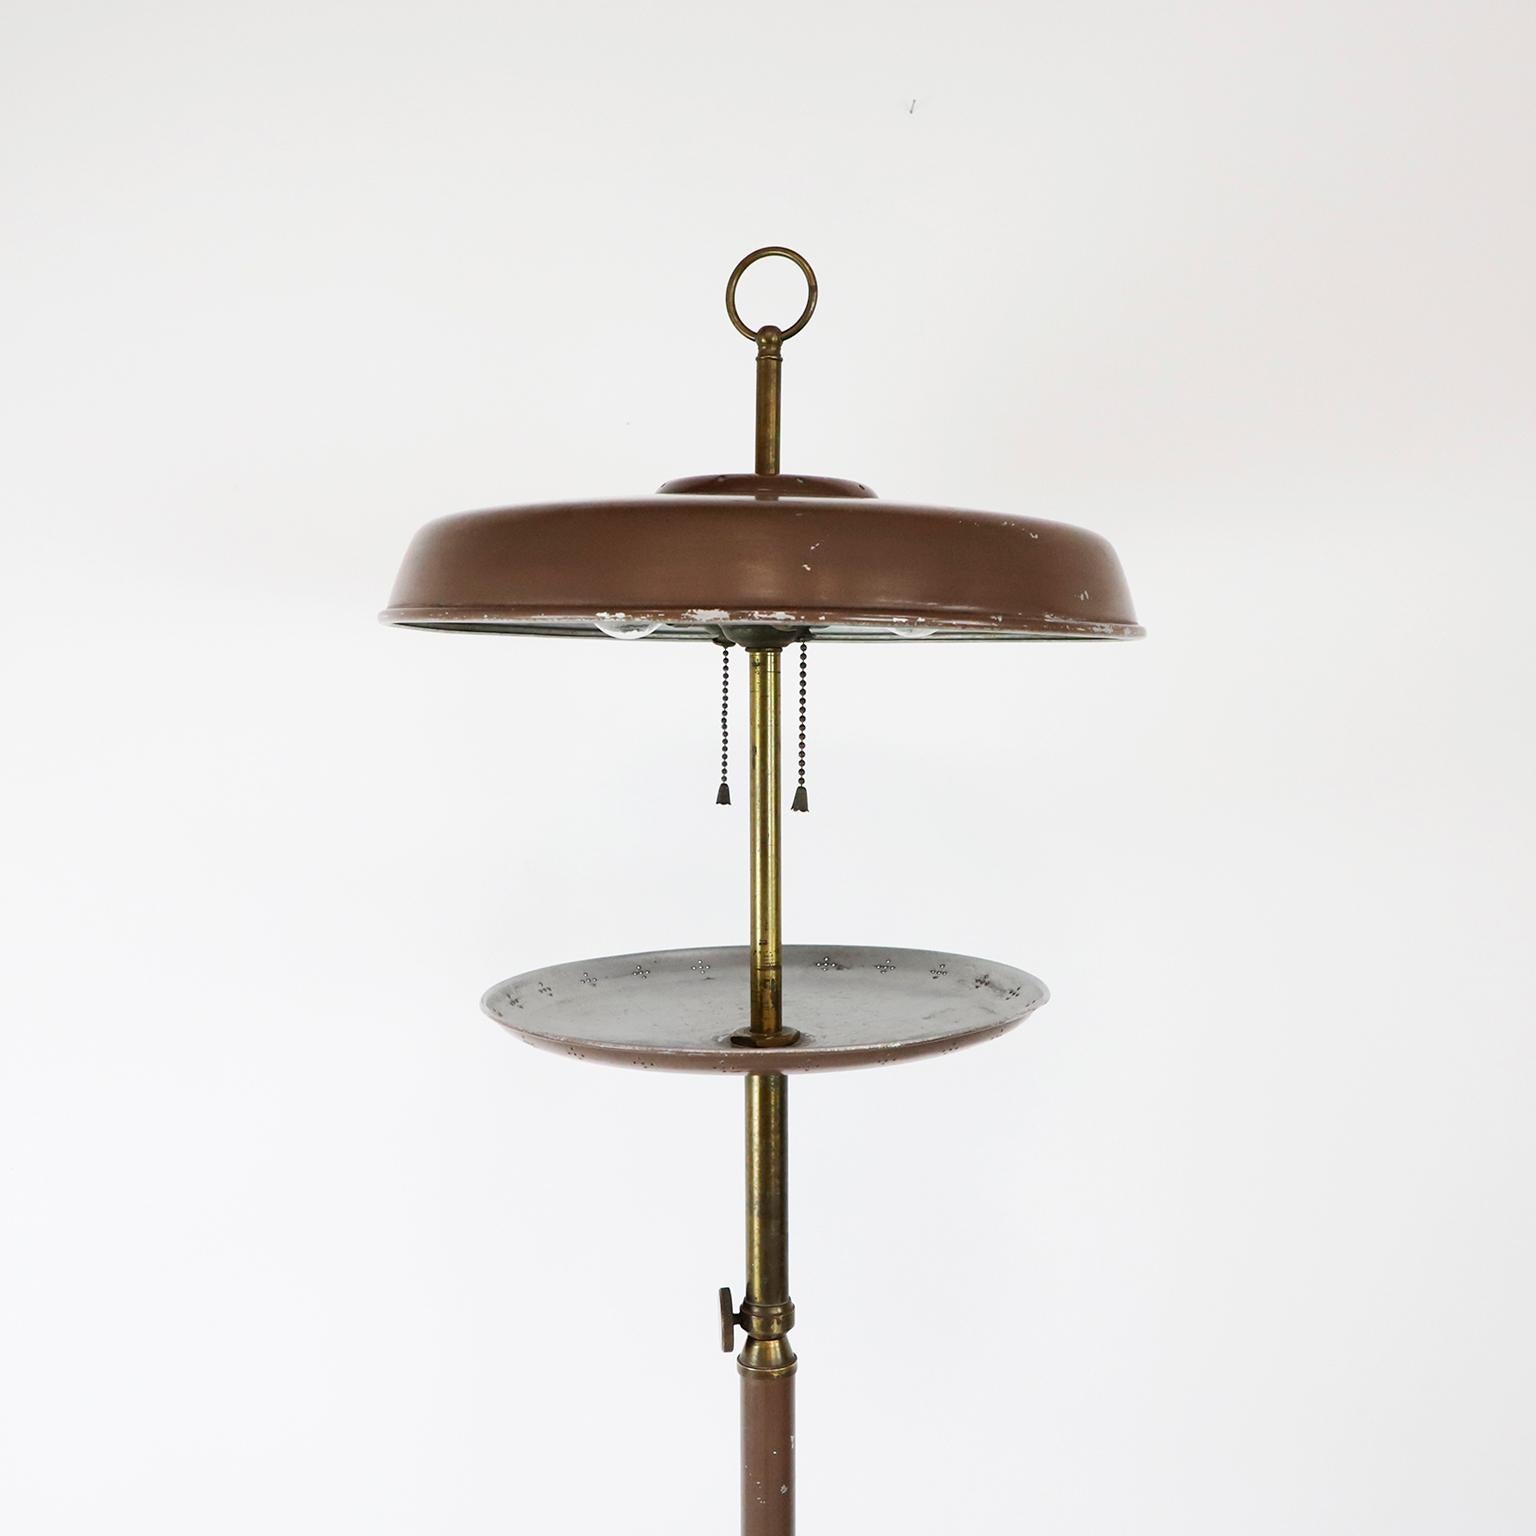 Circa 1930. We offer this fantastic Art Deco Floor Lamp. Brass Details, circa 1930s, great patina and working at perfection.